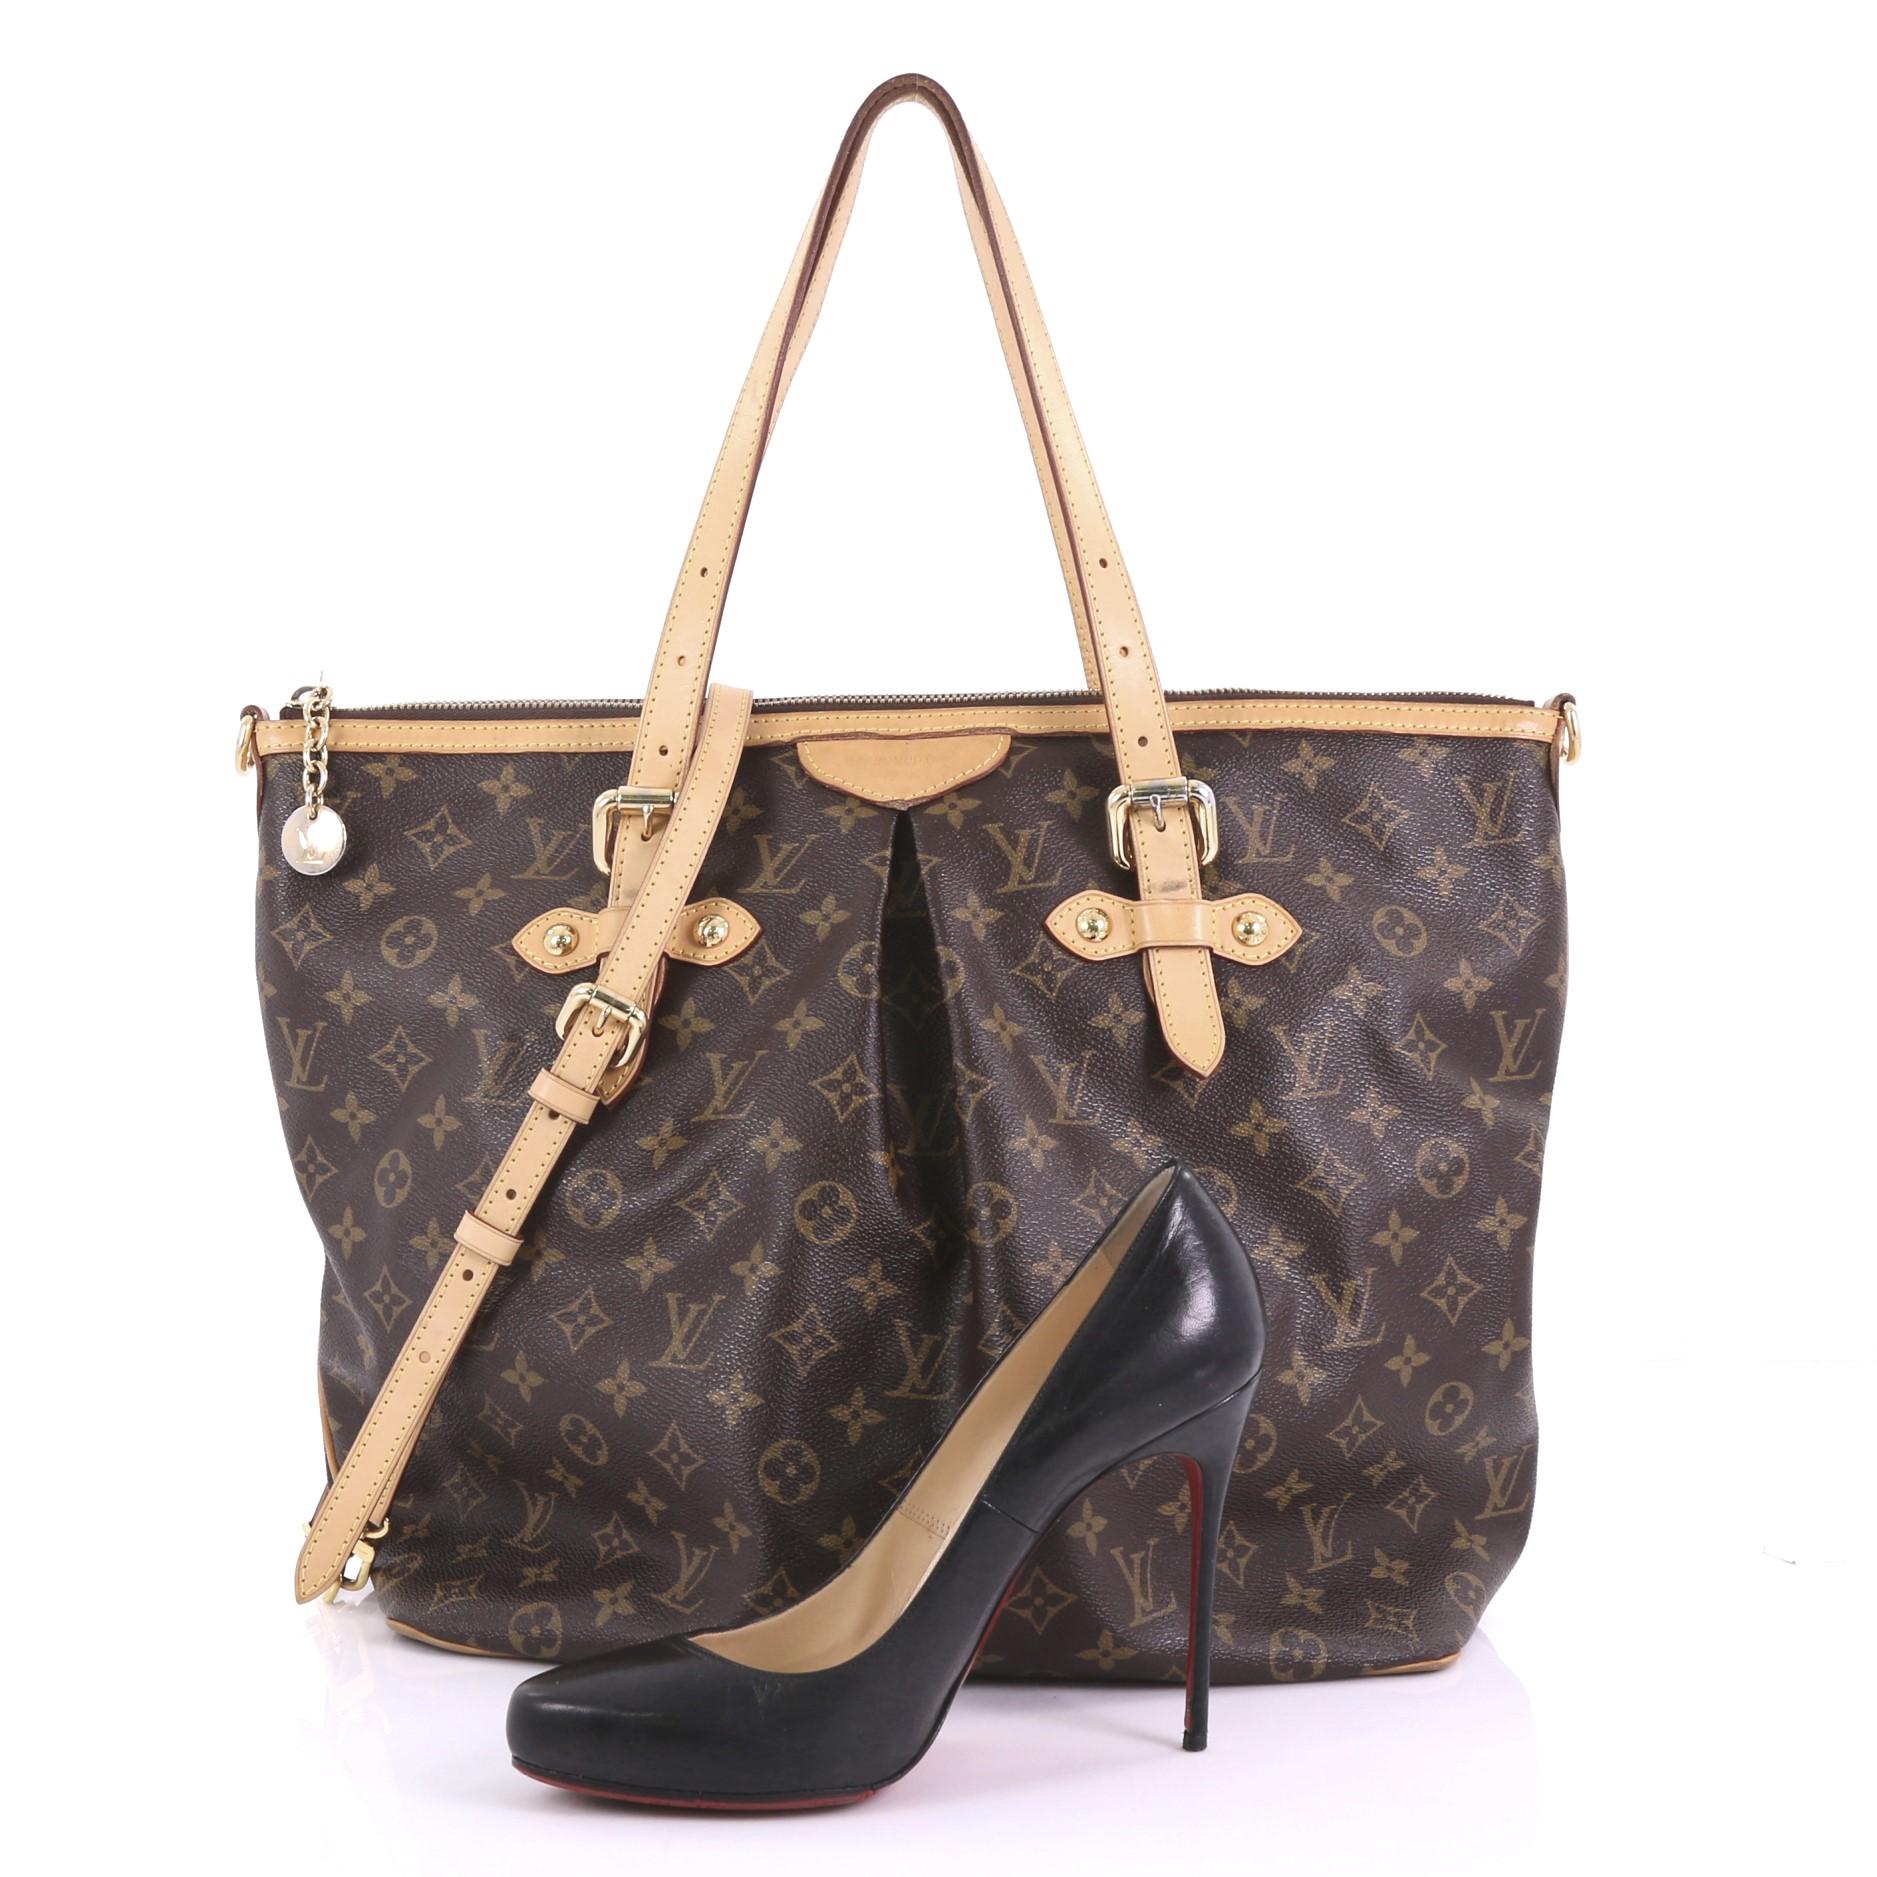 This Louis Vuitton Palermo Handbag Monogram Canvas GM, crafted in brown monogram coated canvas and vachetta leather trim, features adjustable handles, inverted pleating and gold-tone hardware. Its zip closure opens to a brown fabric interior with